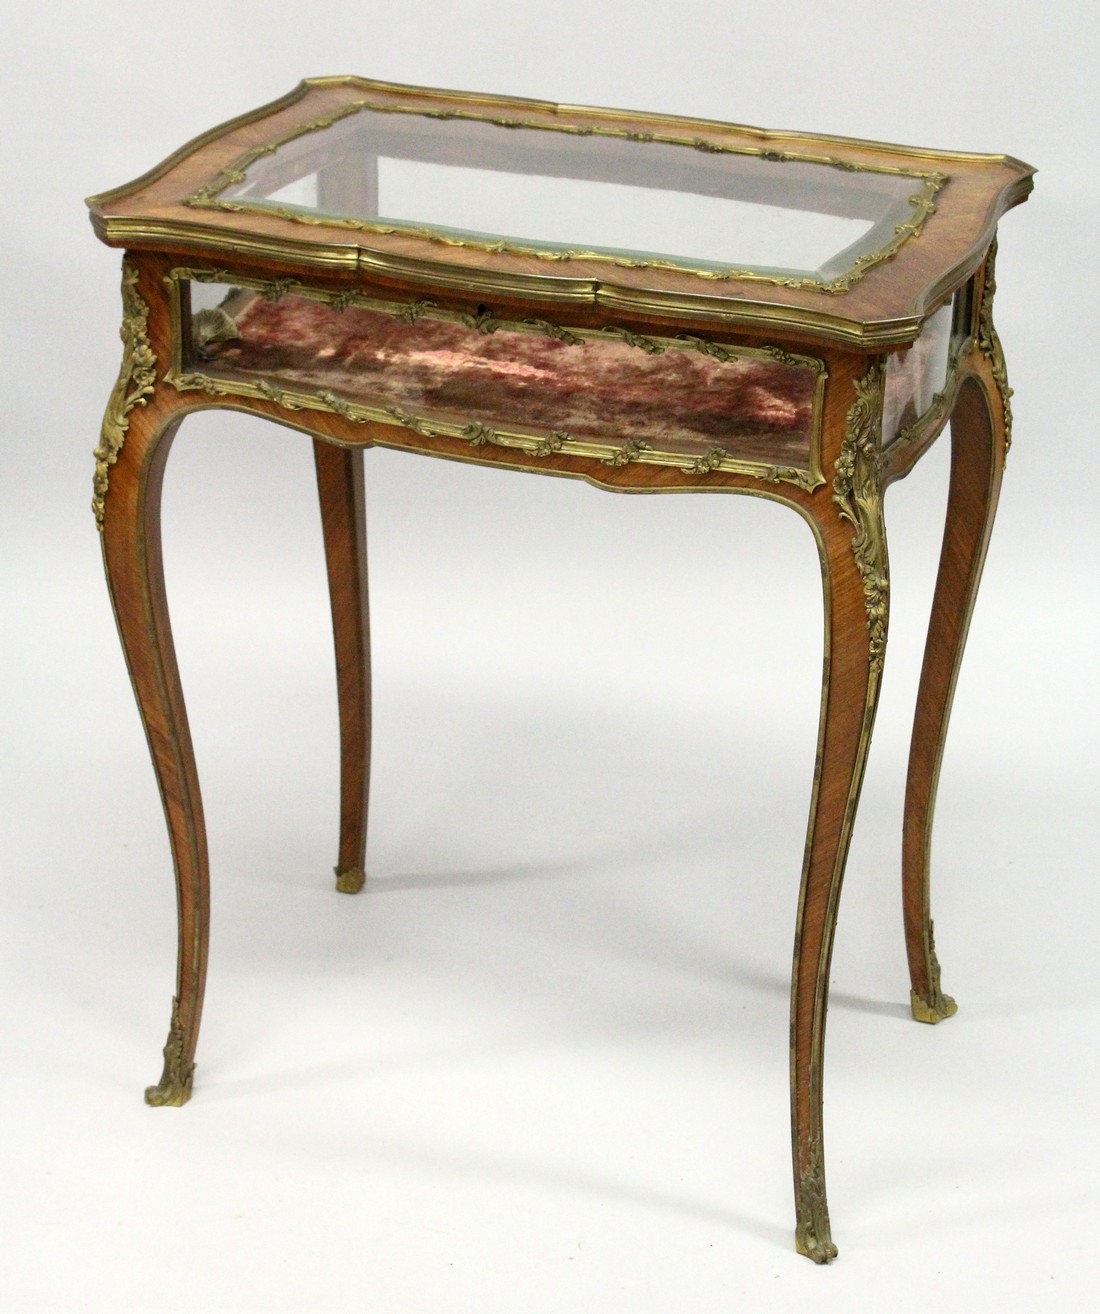 A GOOD 19TH CENTURY FRENCH ROSEWOOD BIJOUTERIE TABLE with ornate mounts, lift-up glazed top, glass